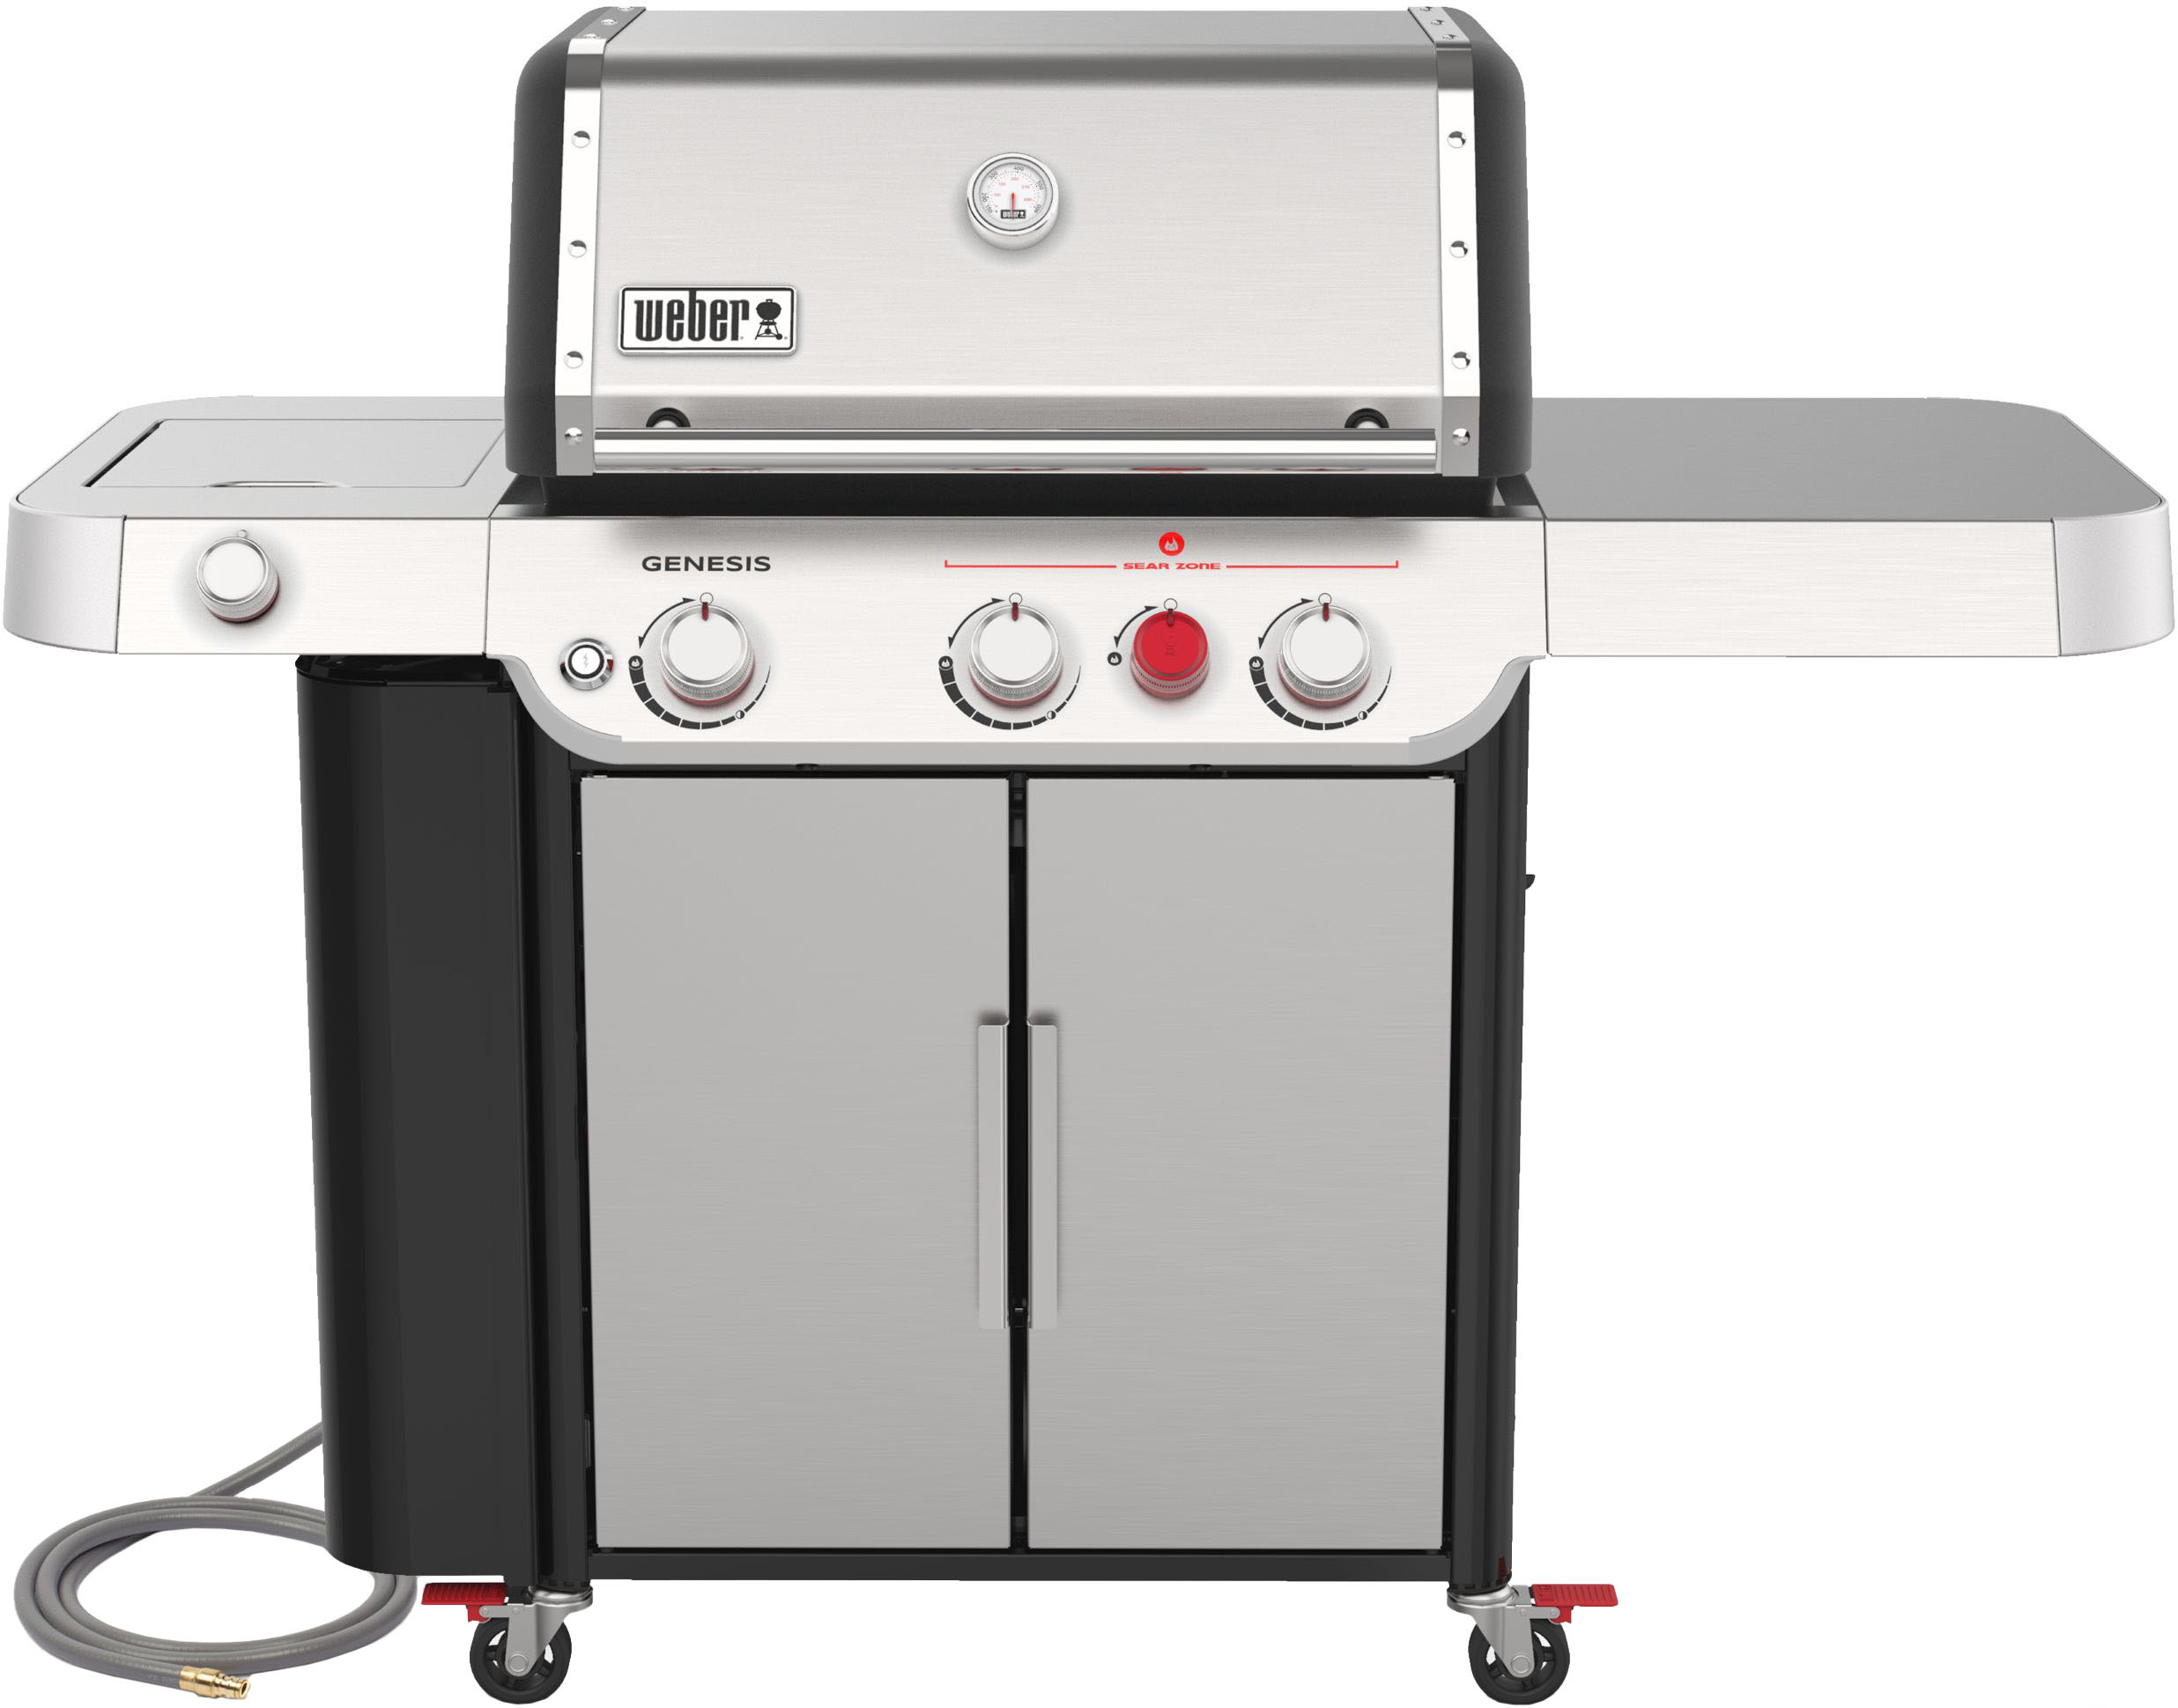 Weber S-335 Natural Gas Grill Stainless Steel 37400001 - Best Buy